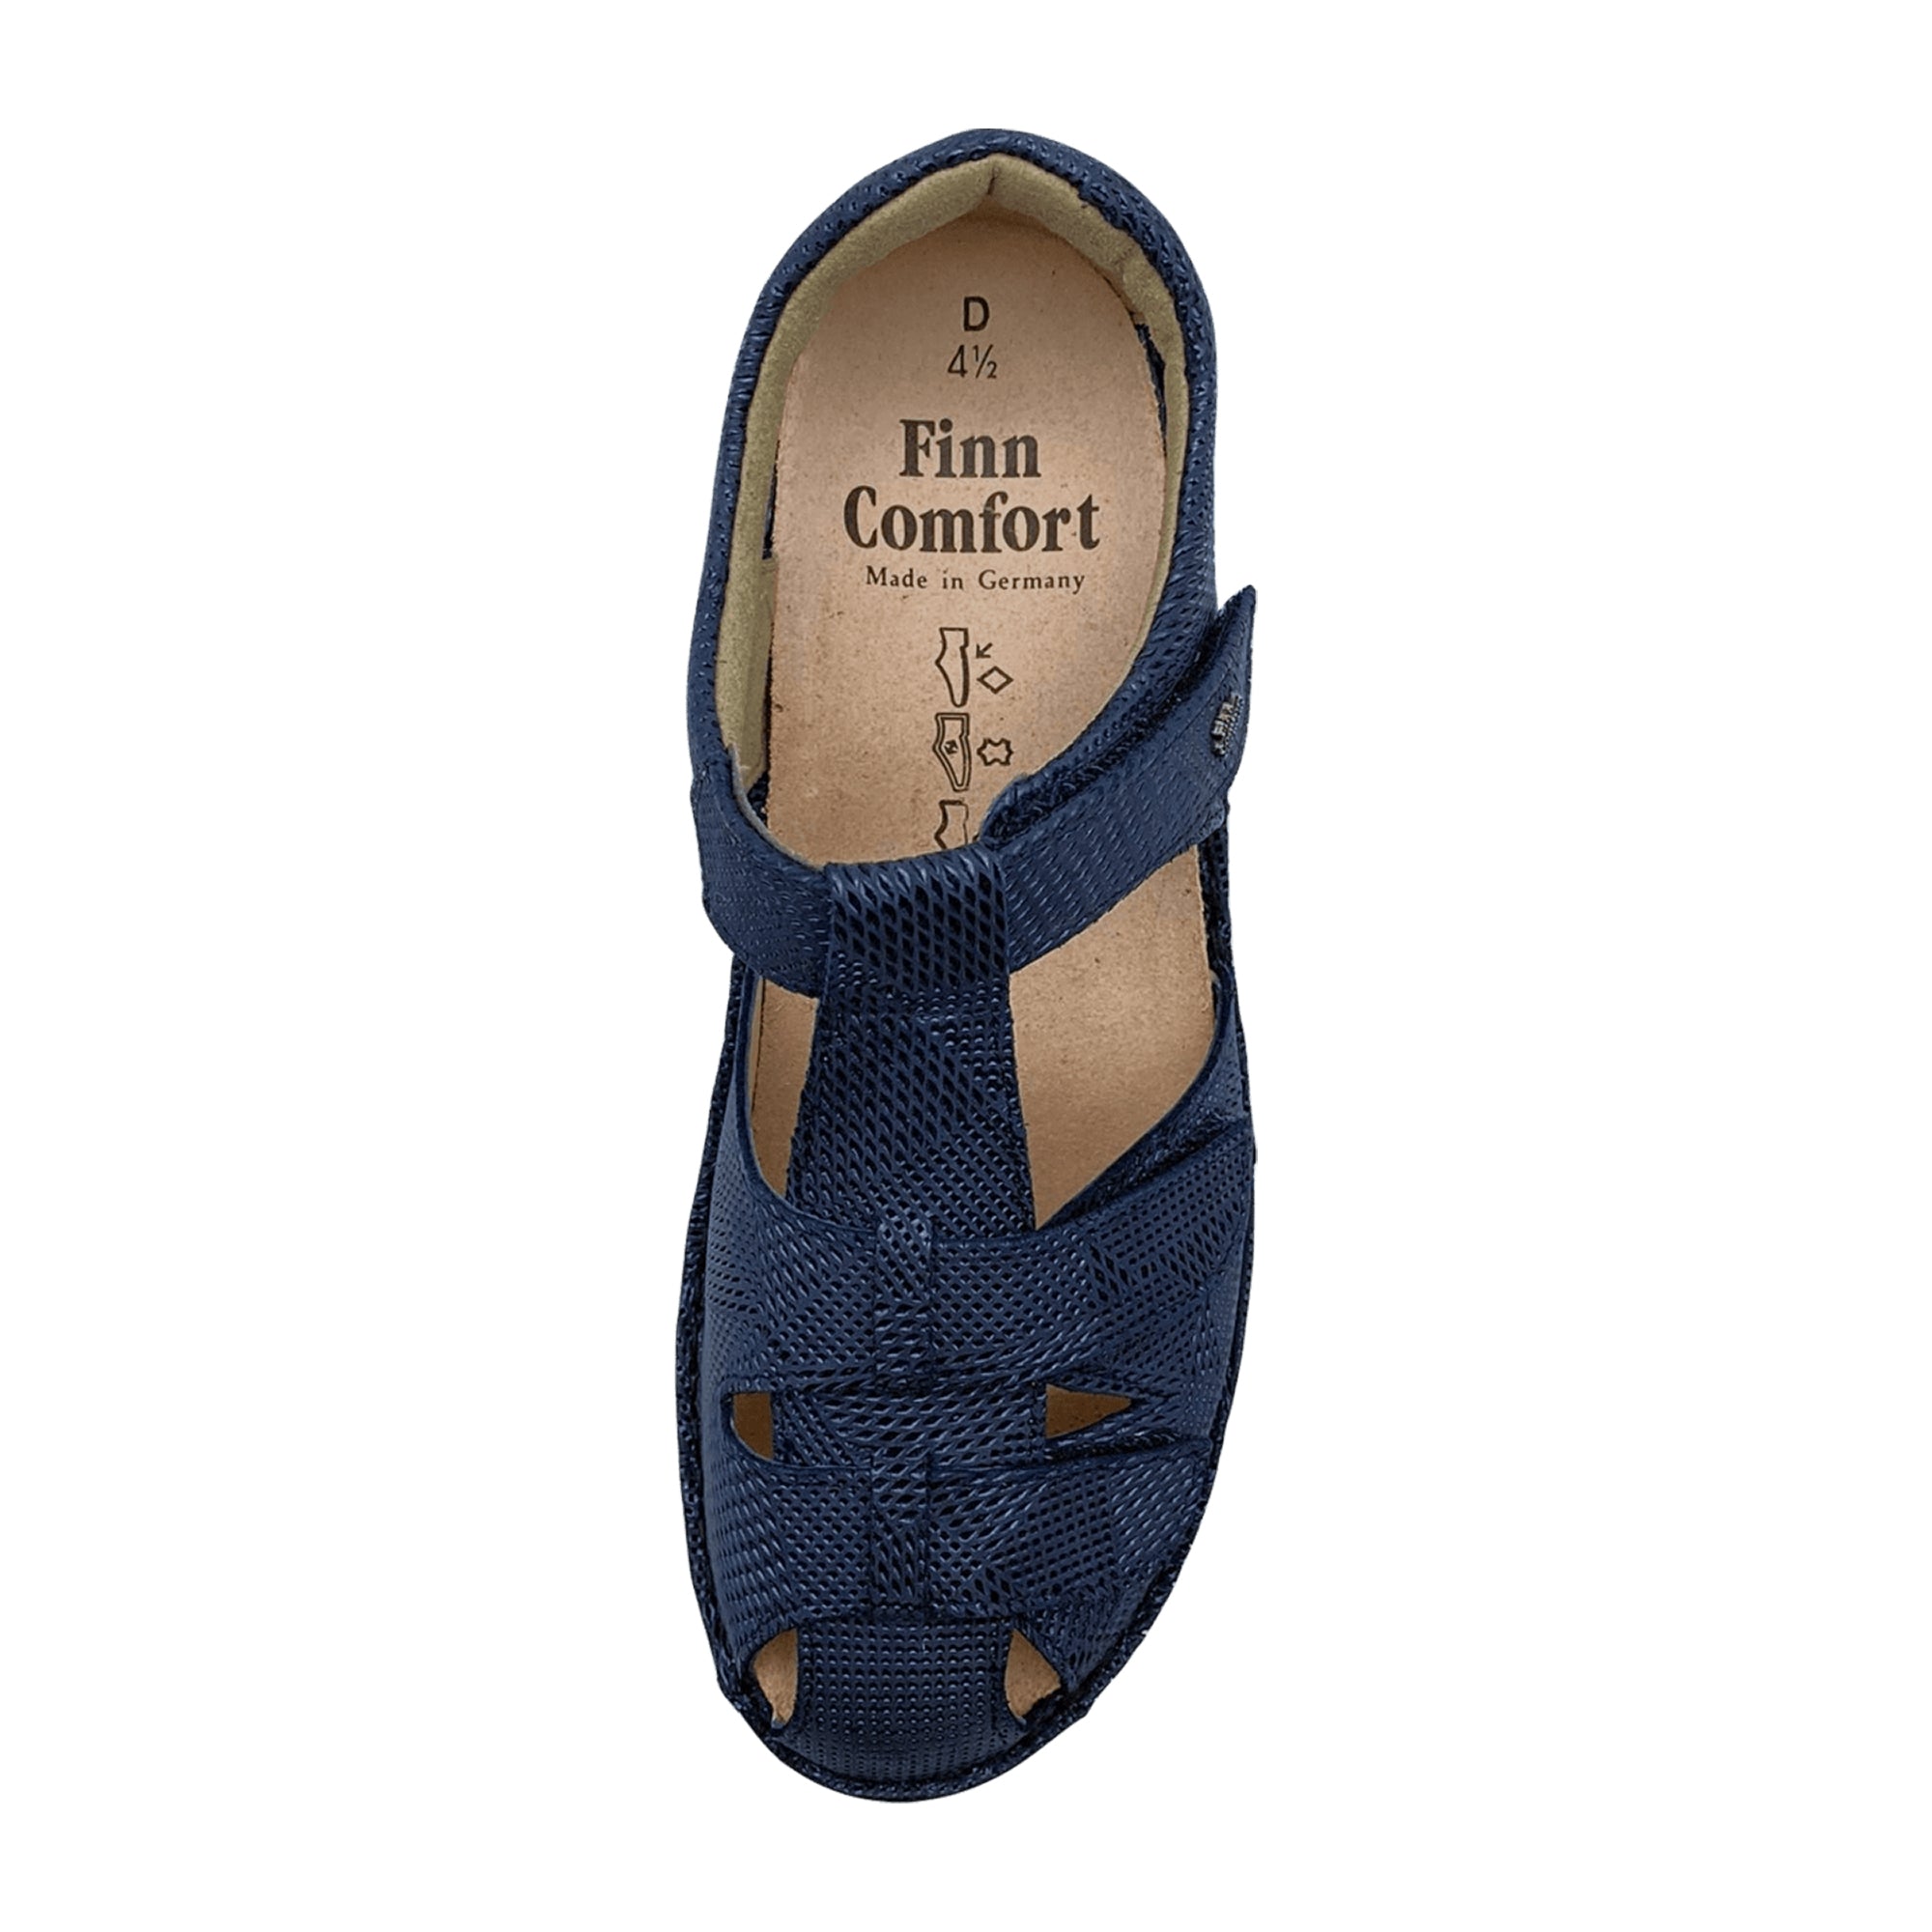 Finn Comfort Fünen Women's Comfort Shoes, Stylish Blue - Durable and Supportive